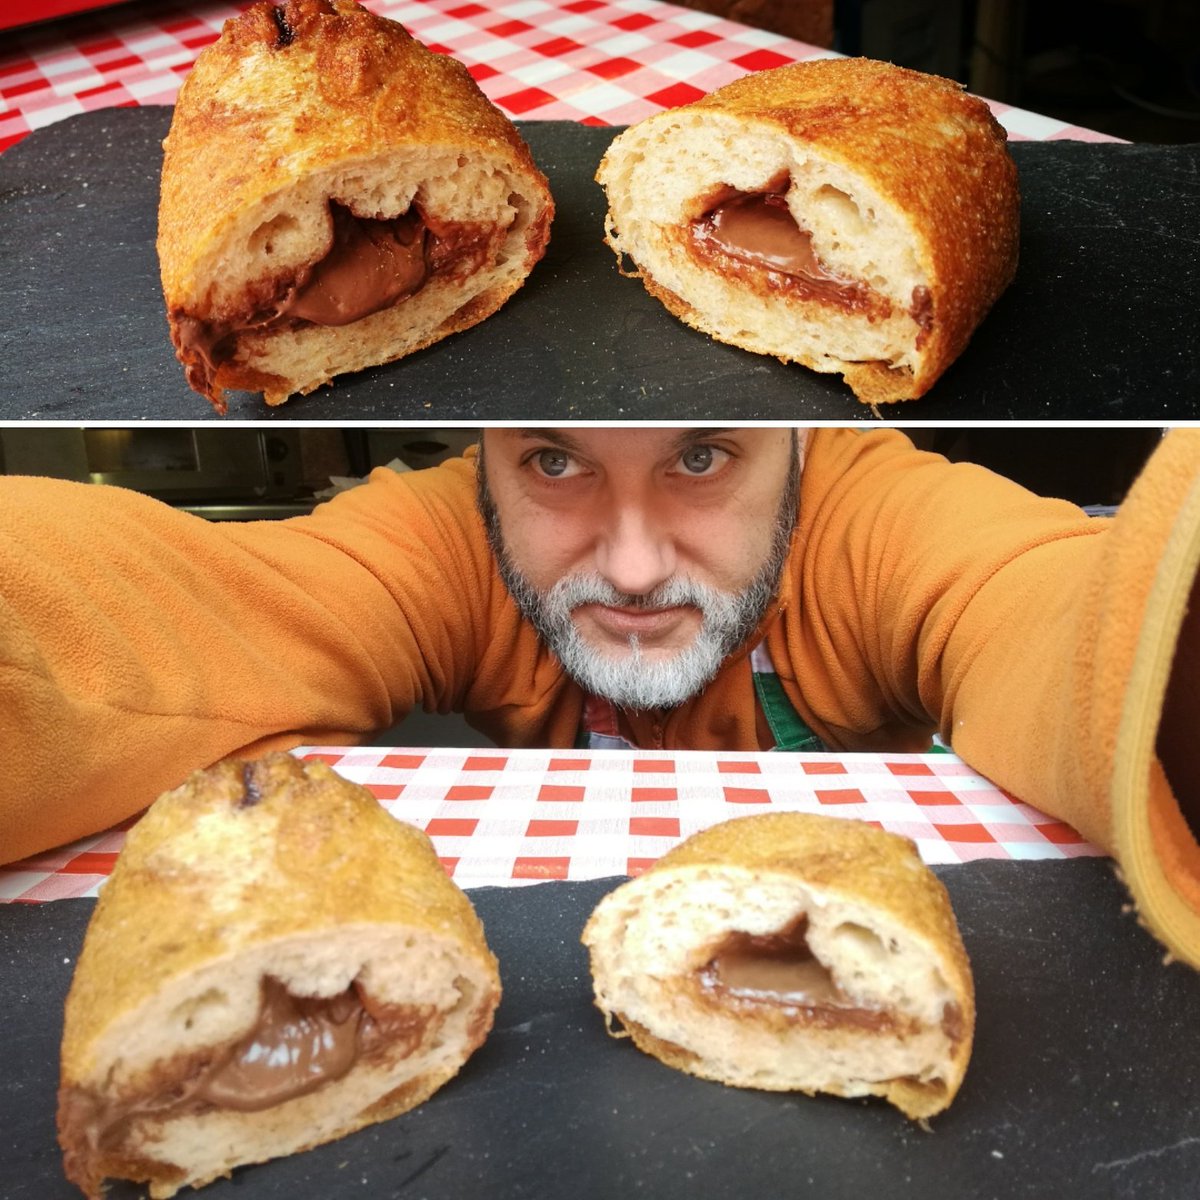 My latest creation at #pizzoliyork #deepfrieddough with #nutella filling! Must try it! @Shambles_Market @YorkFoodFest  @indieyorkmap